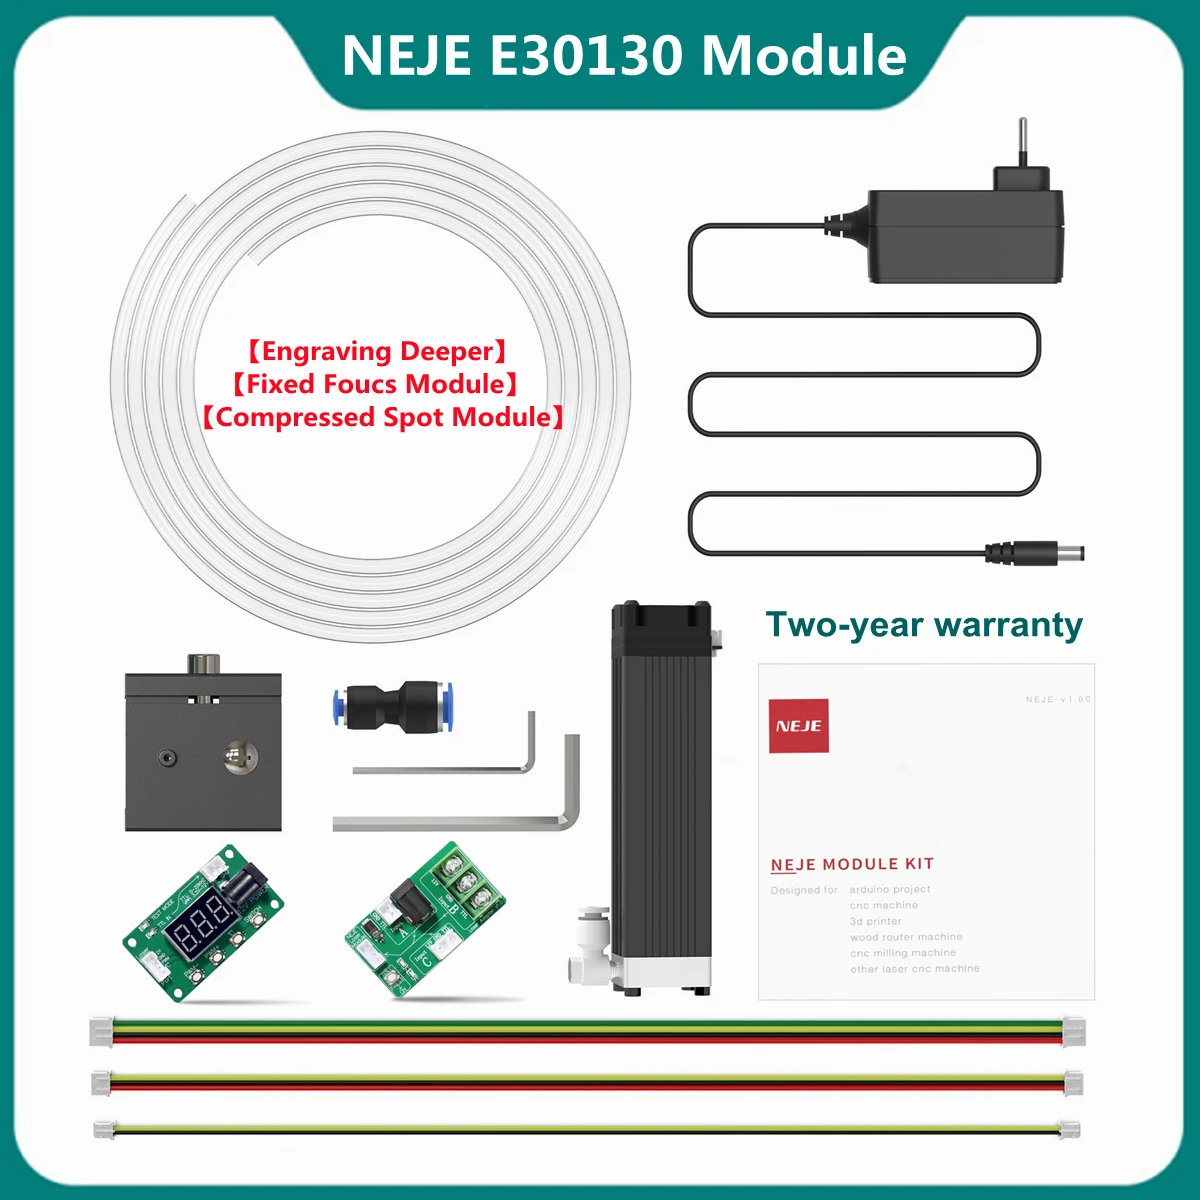 NEJE E30130 Optical Compressio Fixed Foucs 60W Laser Module Kit for CNC Laser Engraver Wood Cutting Metal Engraving Tools